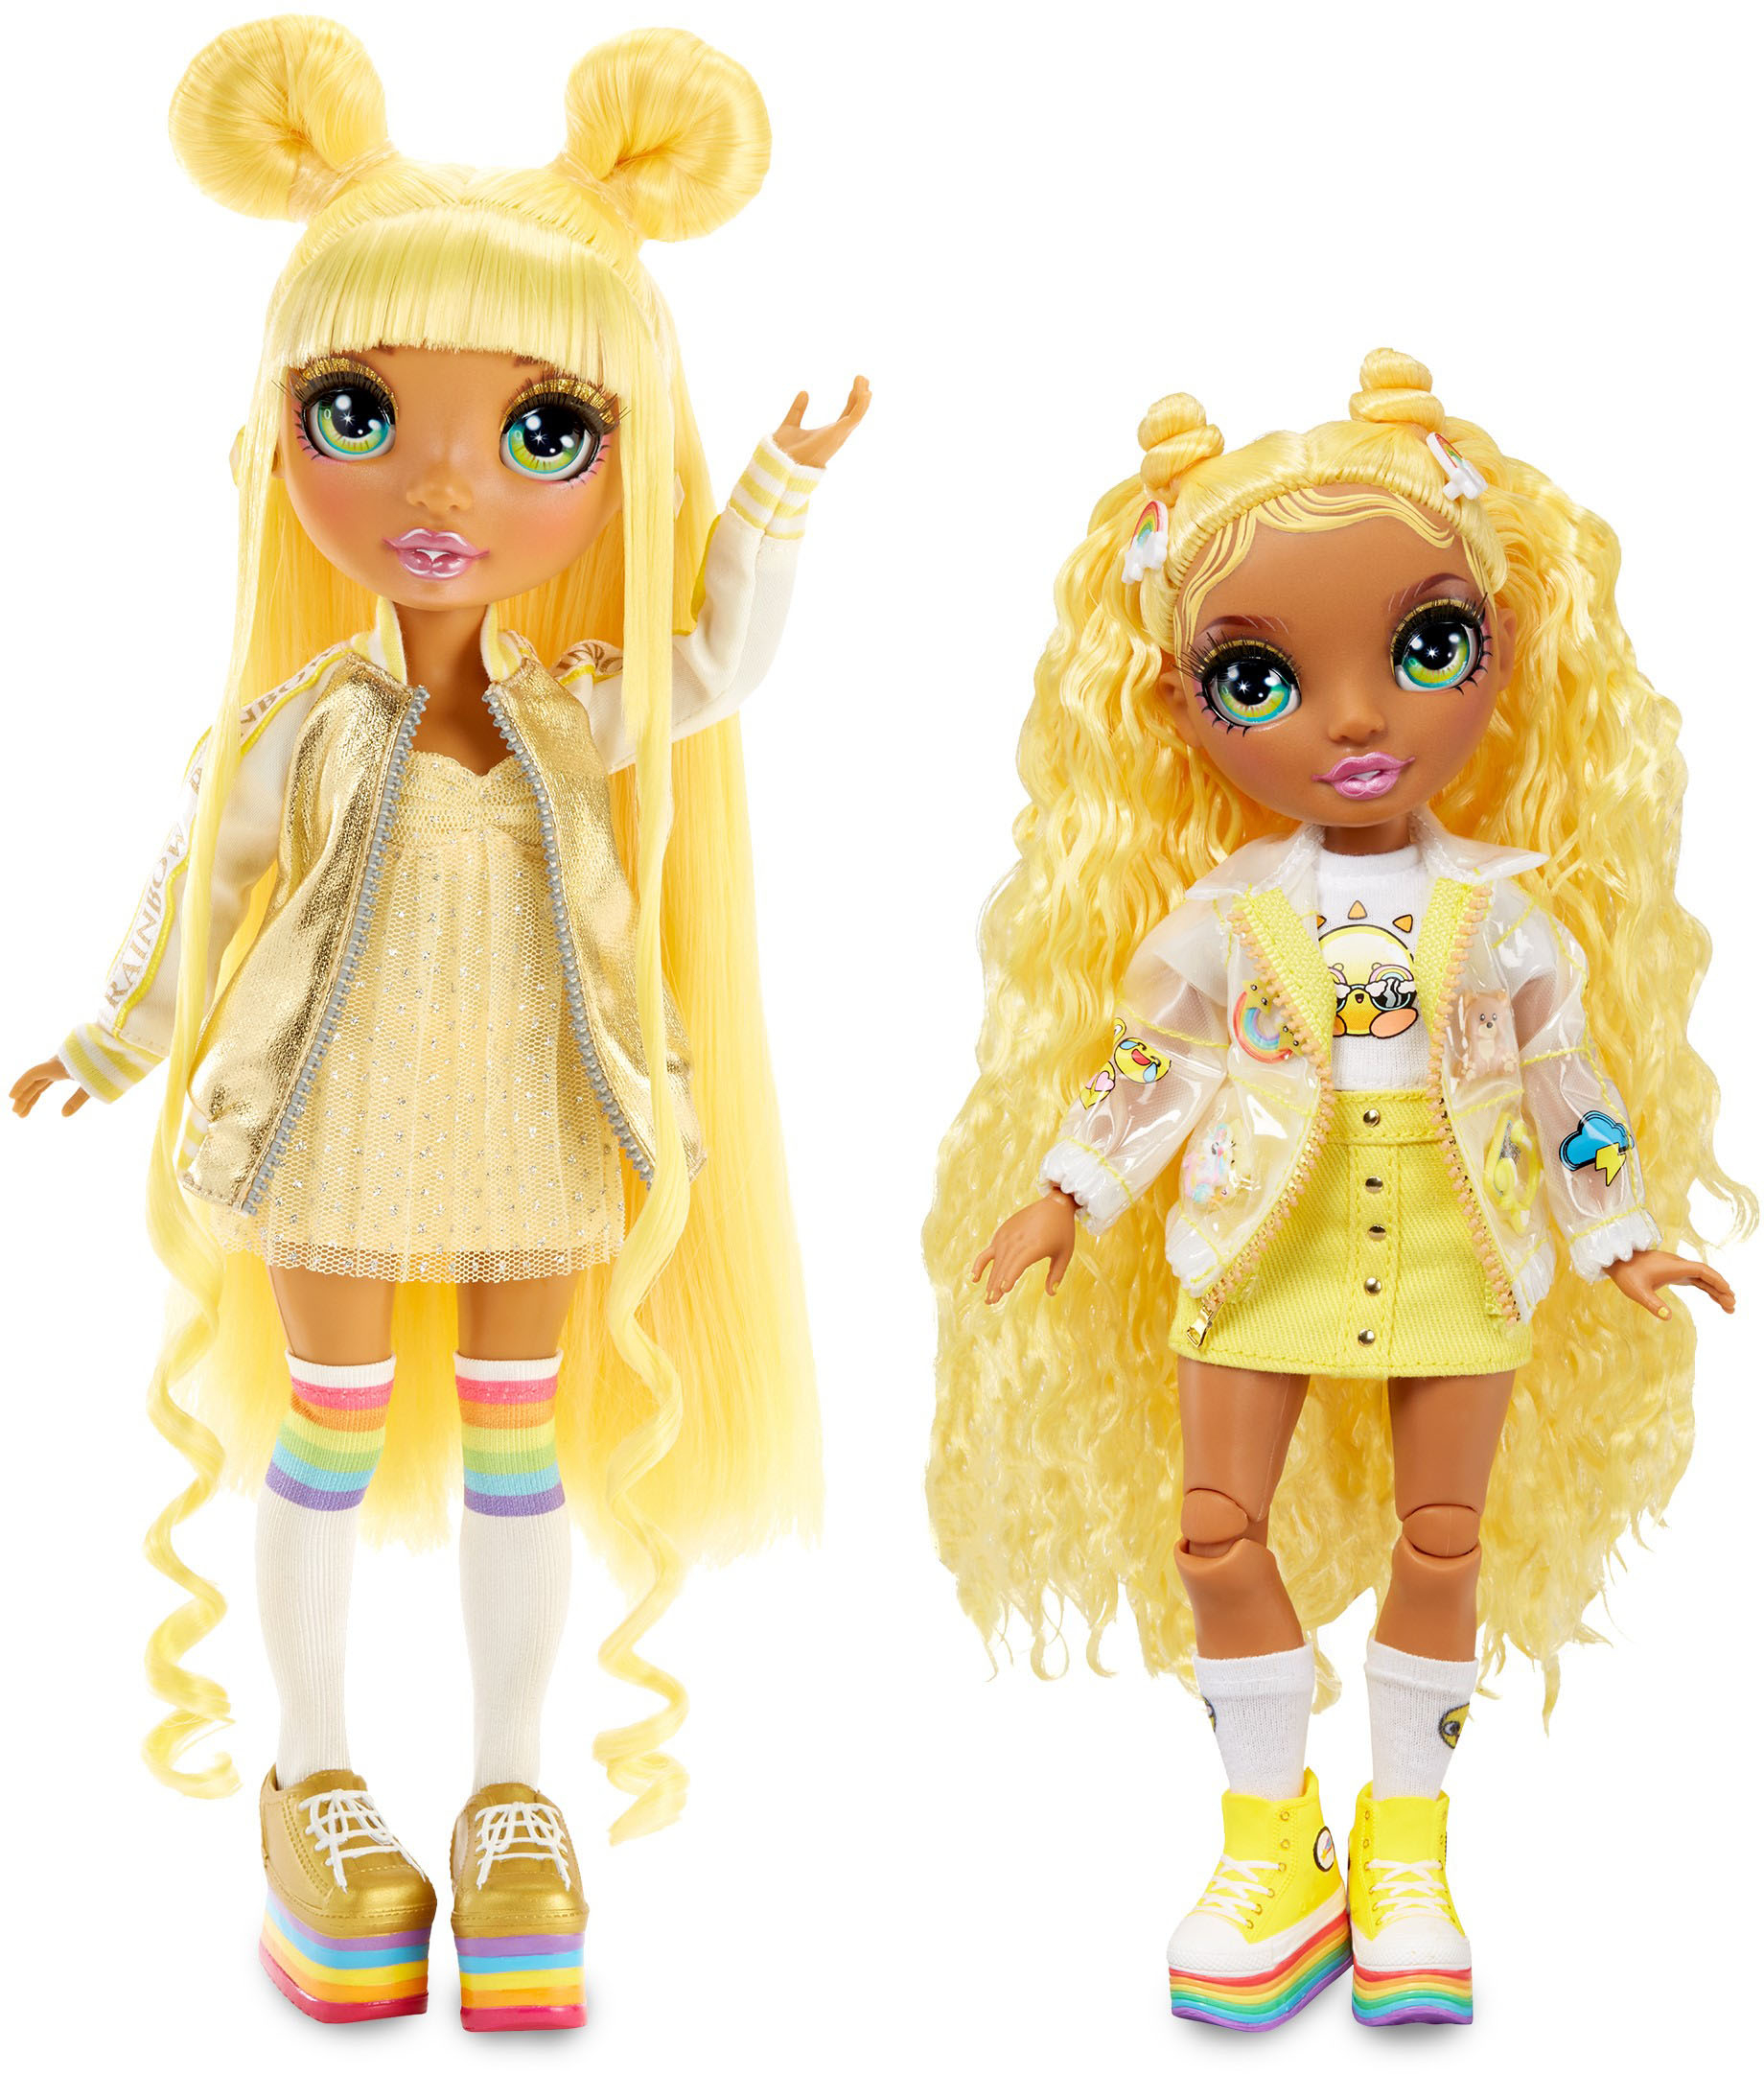 Details about   MGA Doll  Rainbow High Sunny Madison Replacement  Gold Top OOAK 